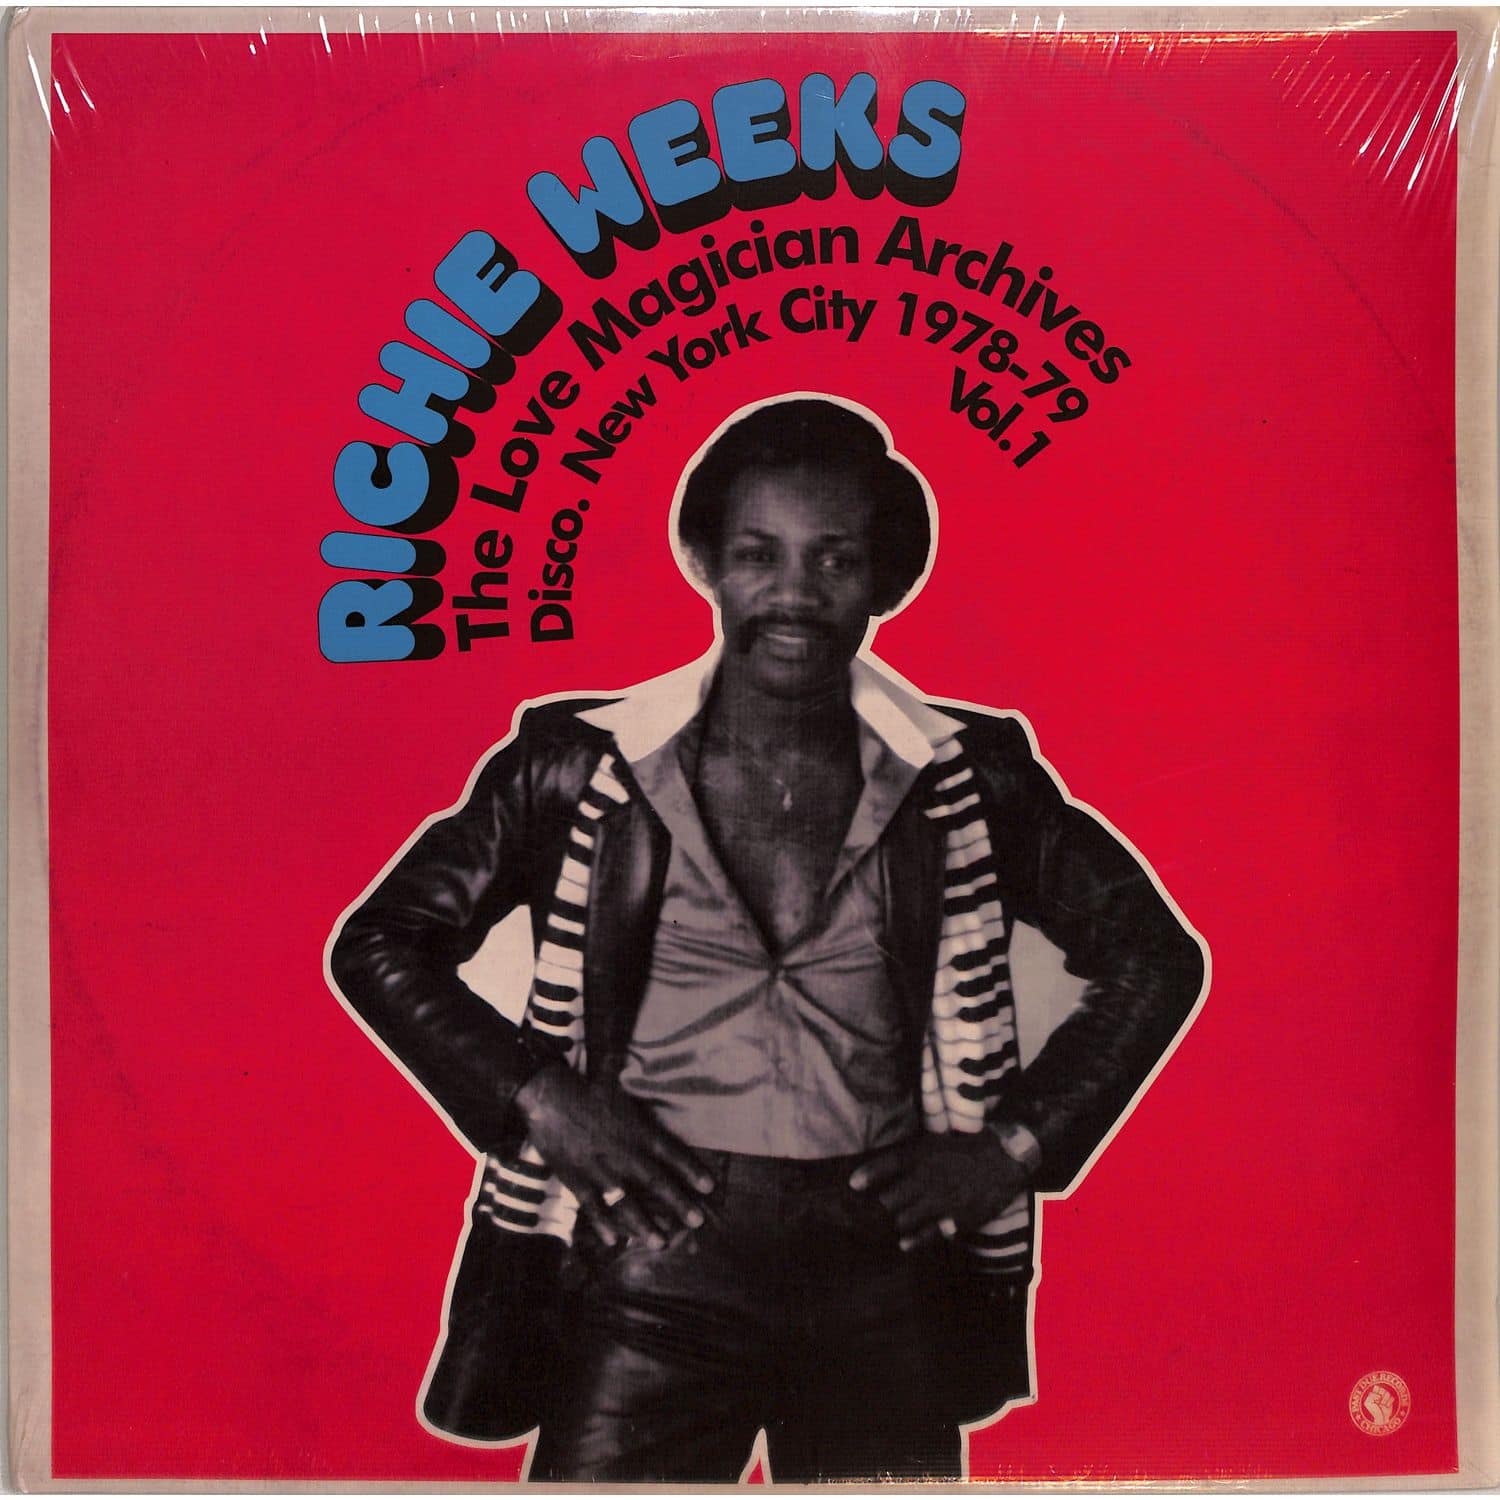 Richie Weeks - THE LOVE MAGICIAN ARCHIVES: DISCO NEW YORK CITY 1978-79 VOL 1 